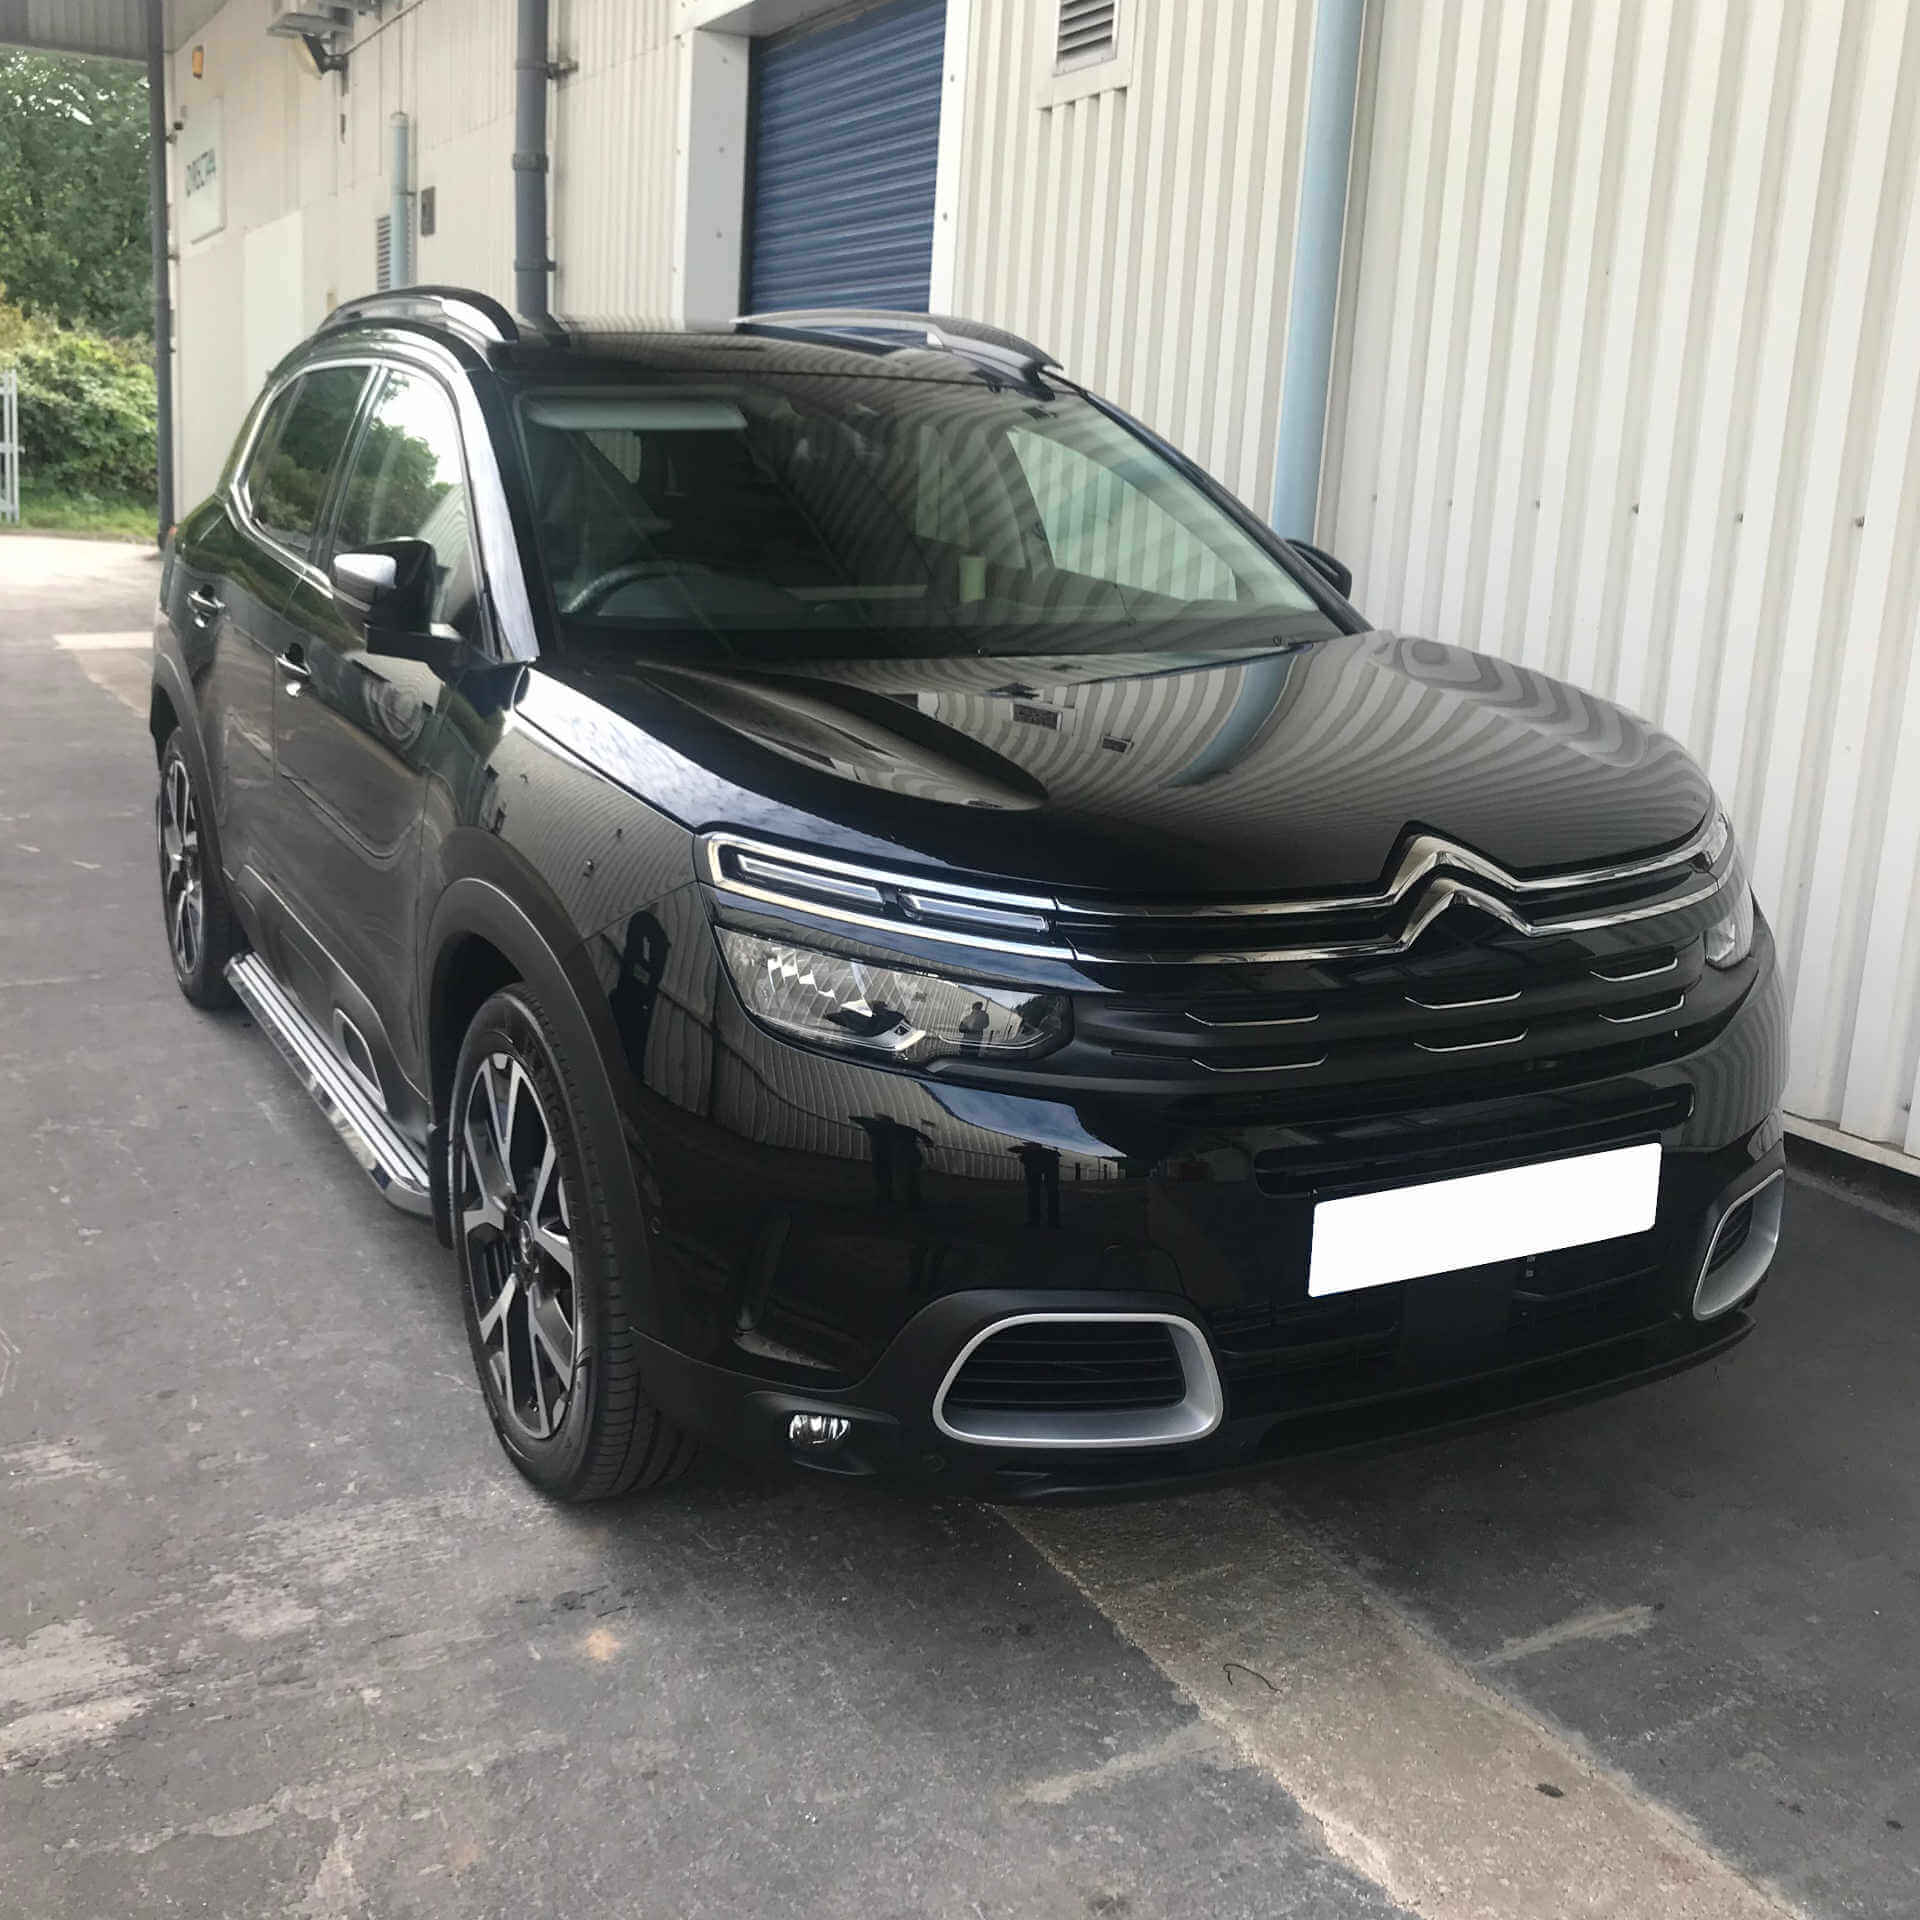 Direct4x4 accessories for Citroen C5 Aircross vehicles with a photo of a black Citroen C5 Aircross fitted with out Stingray steps outside our depot